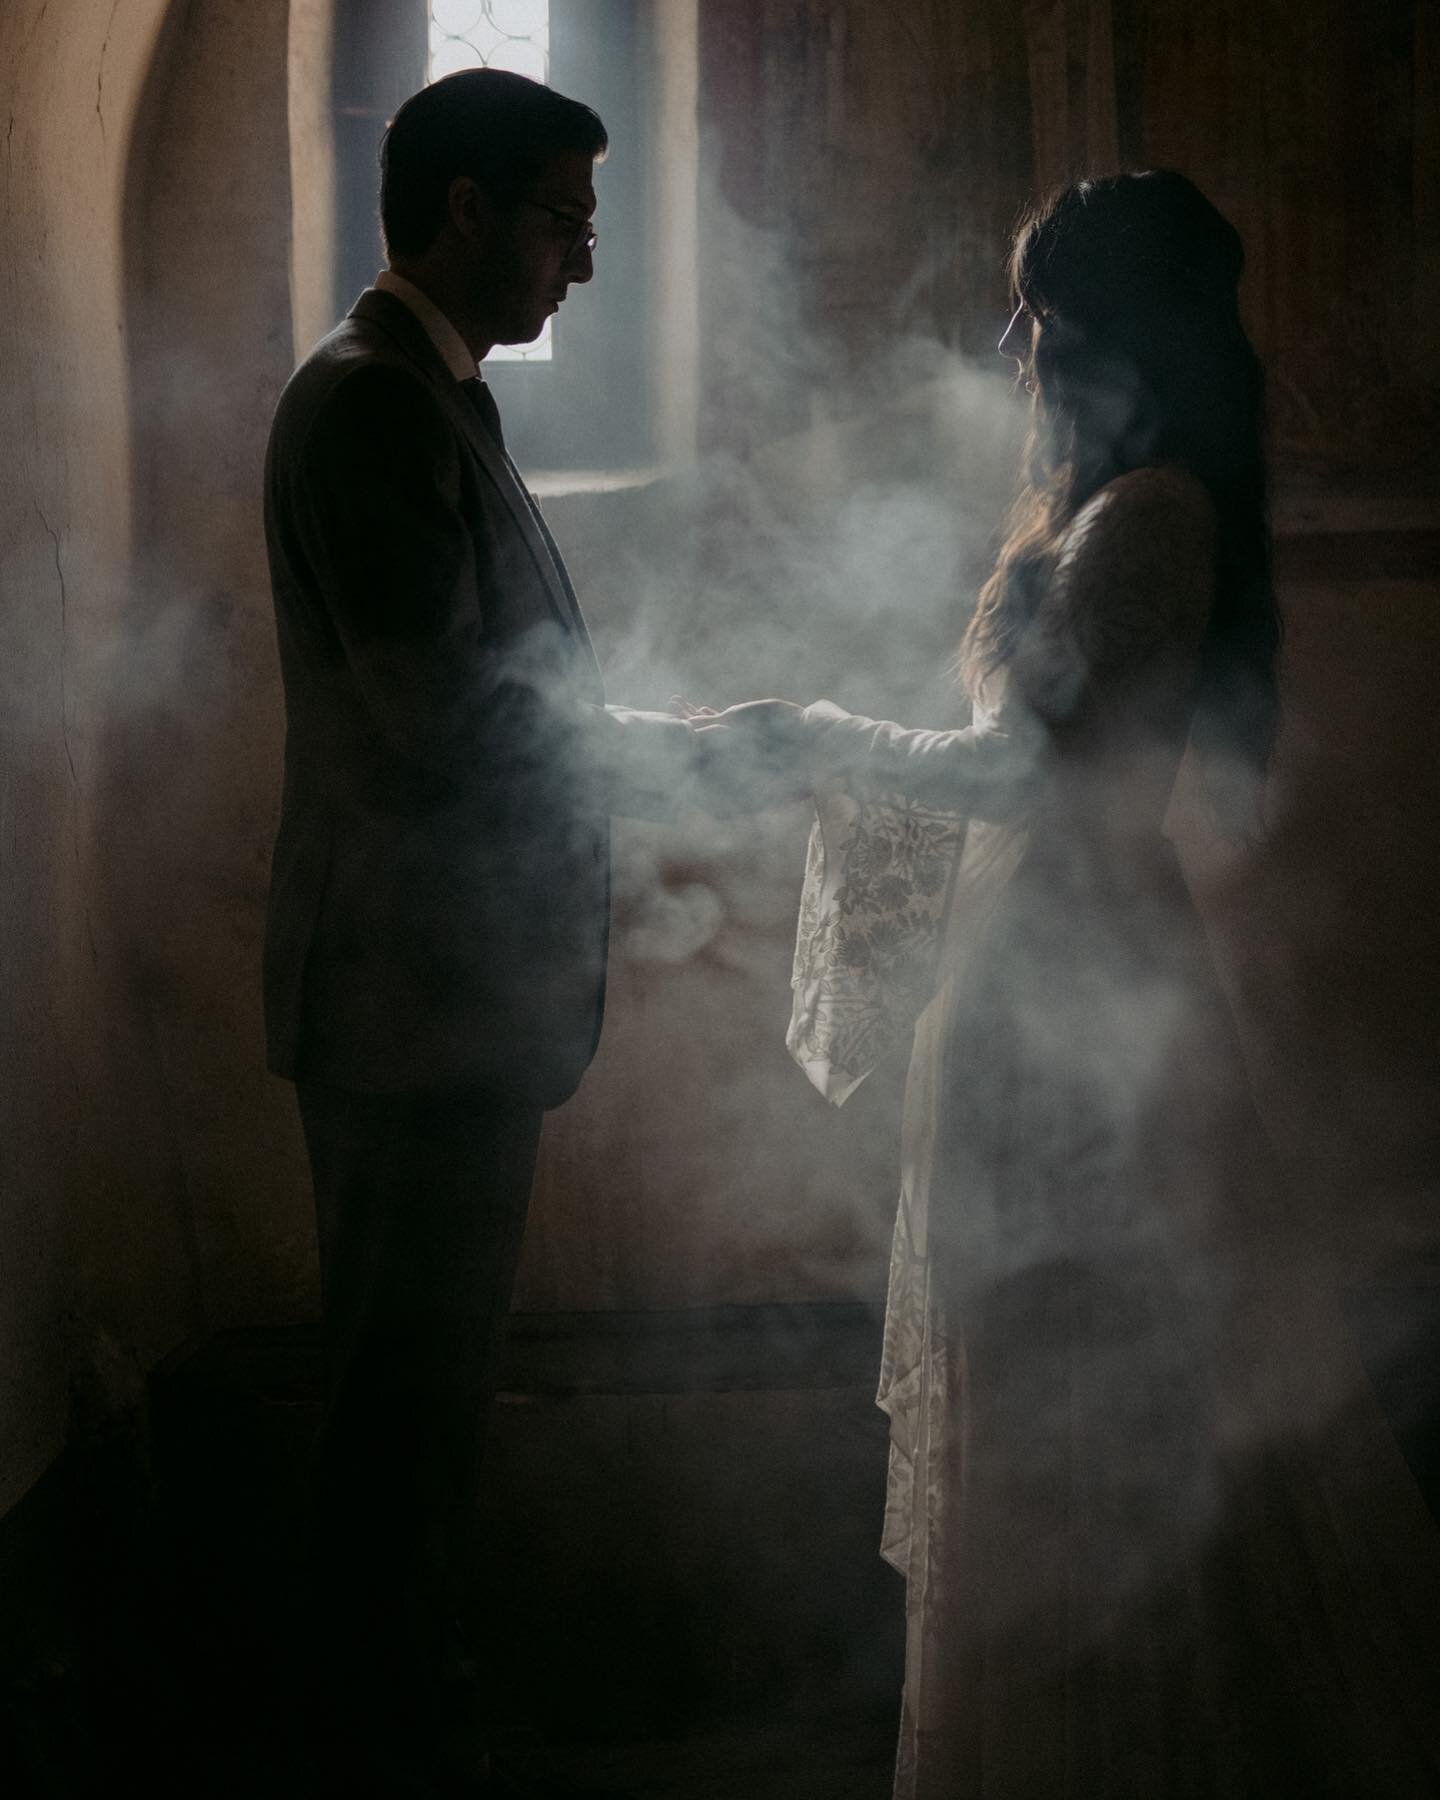 Those quiet moments after you officially become husband and wife are those that are treasured forever.⁠
⁠
@serenacevenini⁠
@weddingbergamo⁠
⁠
⁠
⁠
#eventplanner #eventplanning #lefeast #luxuryweddingplanner #partyplanner #greenweddingshoes #eventdesig